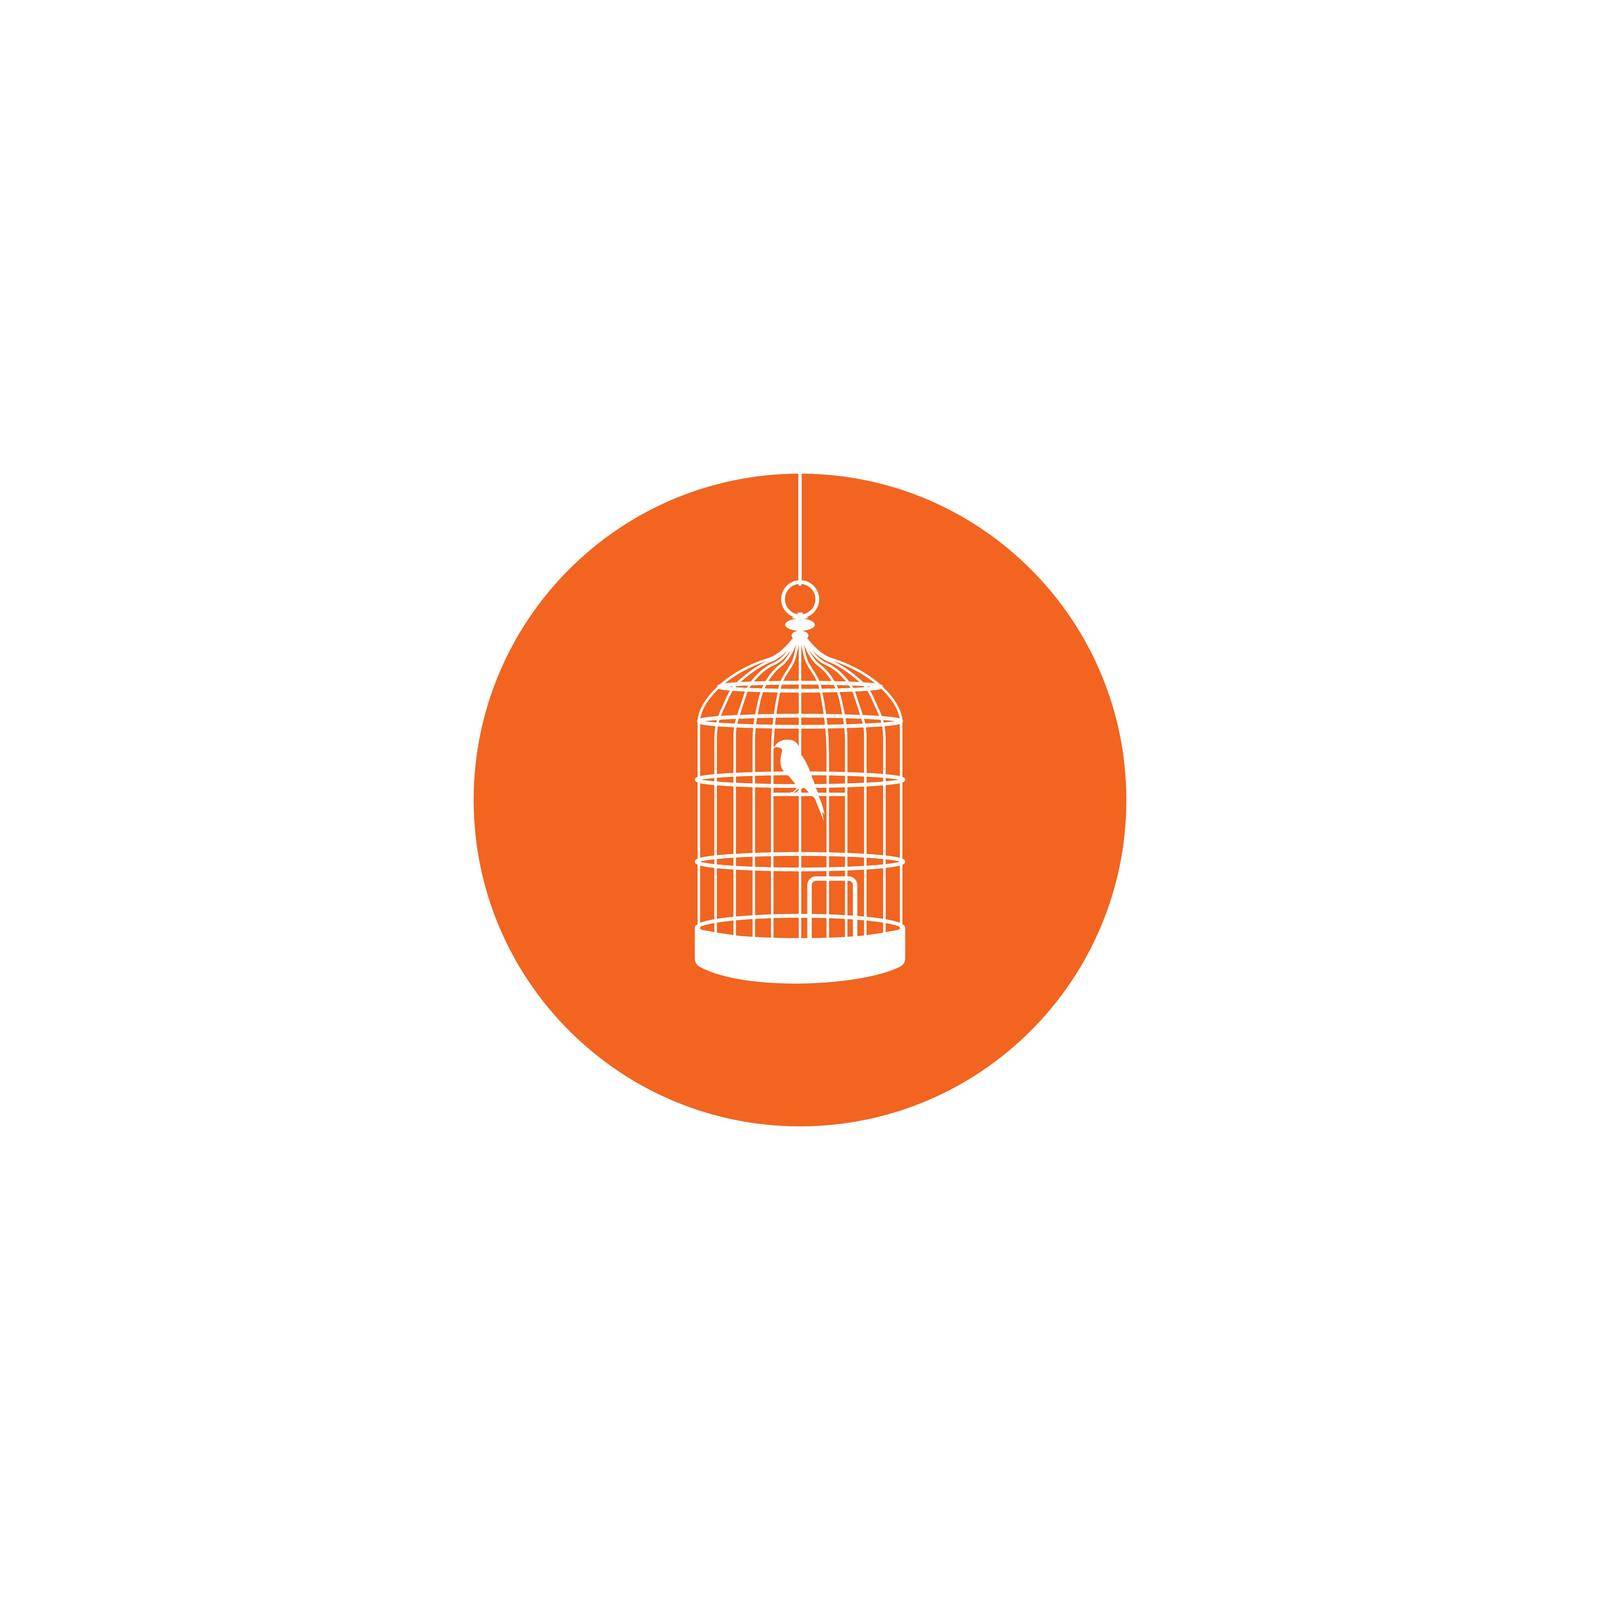 Bird cage icon. by rnking